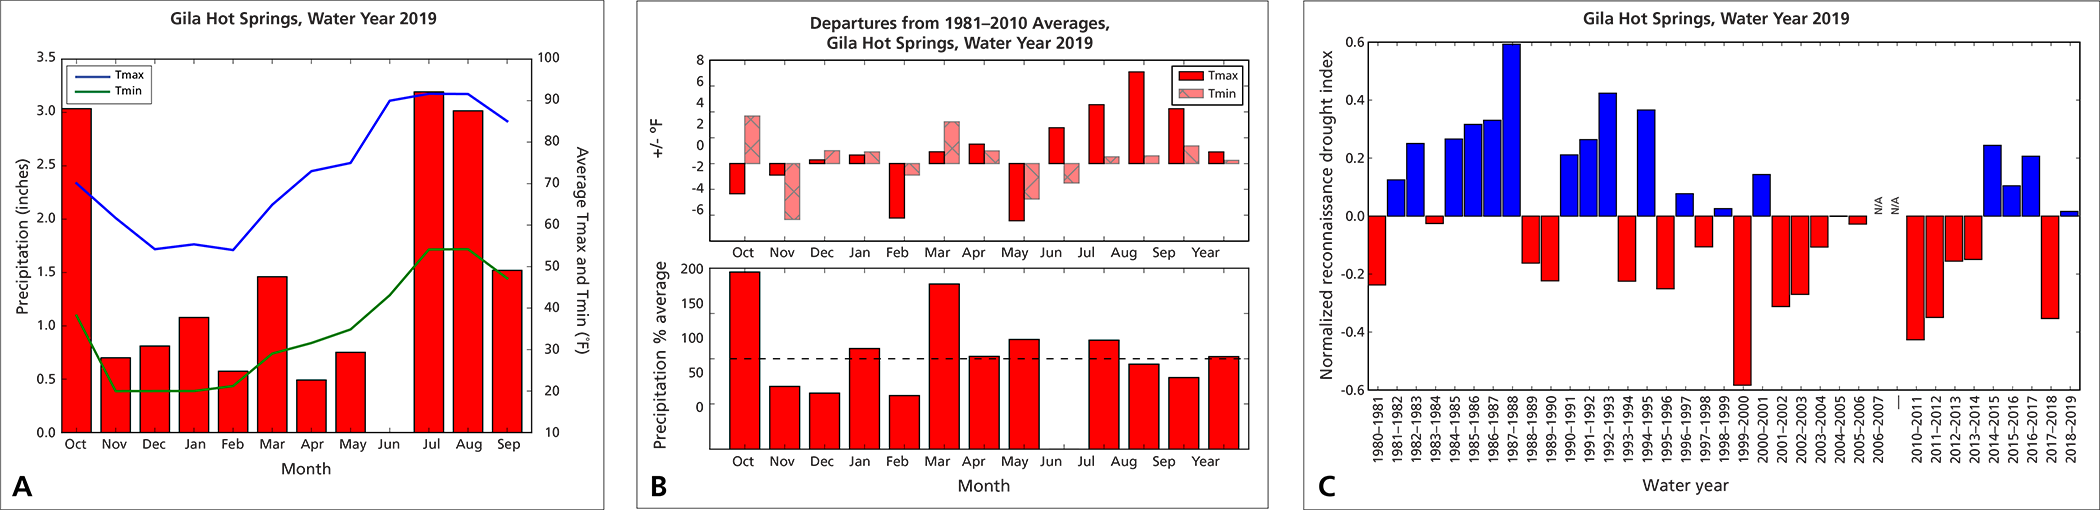 Bar graphs showing temperature and precipitation averages and departures from normal